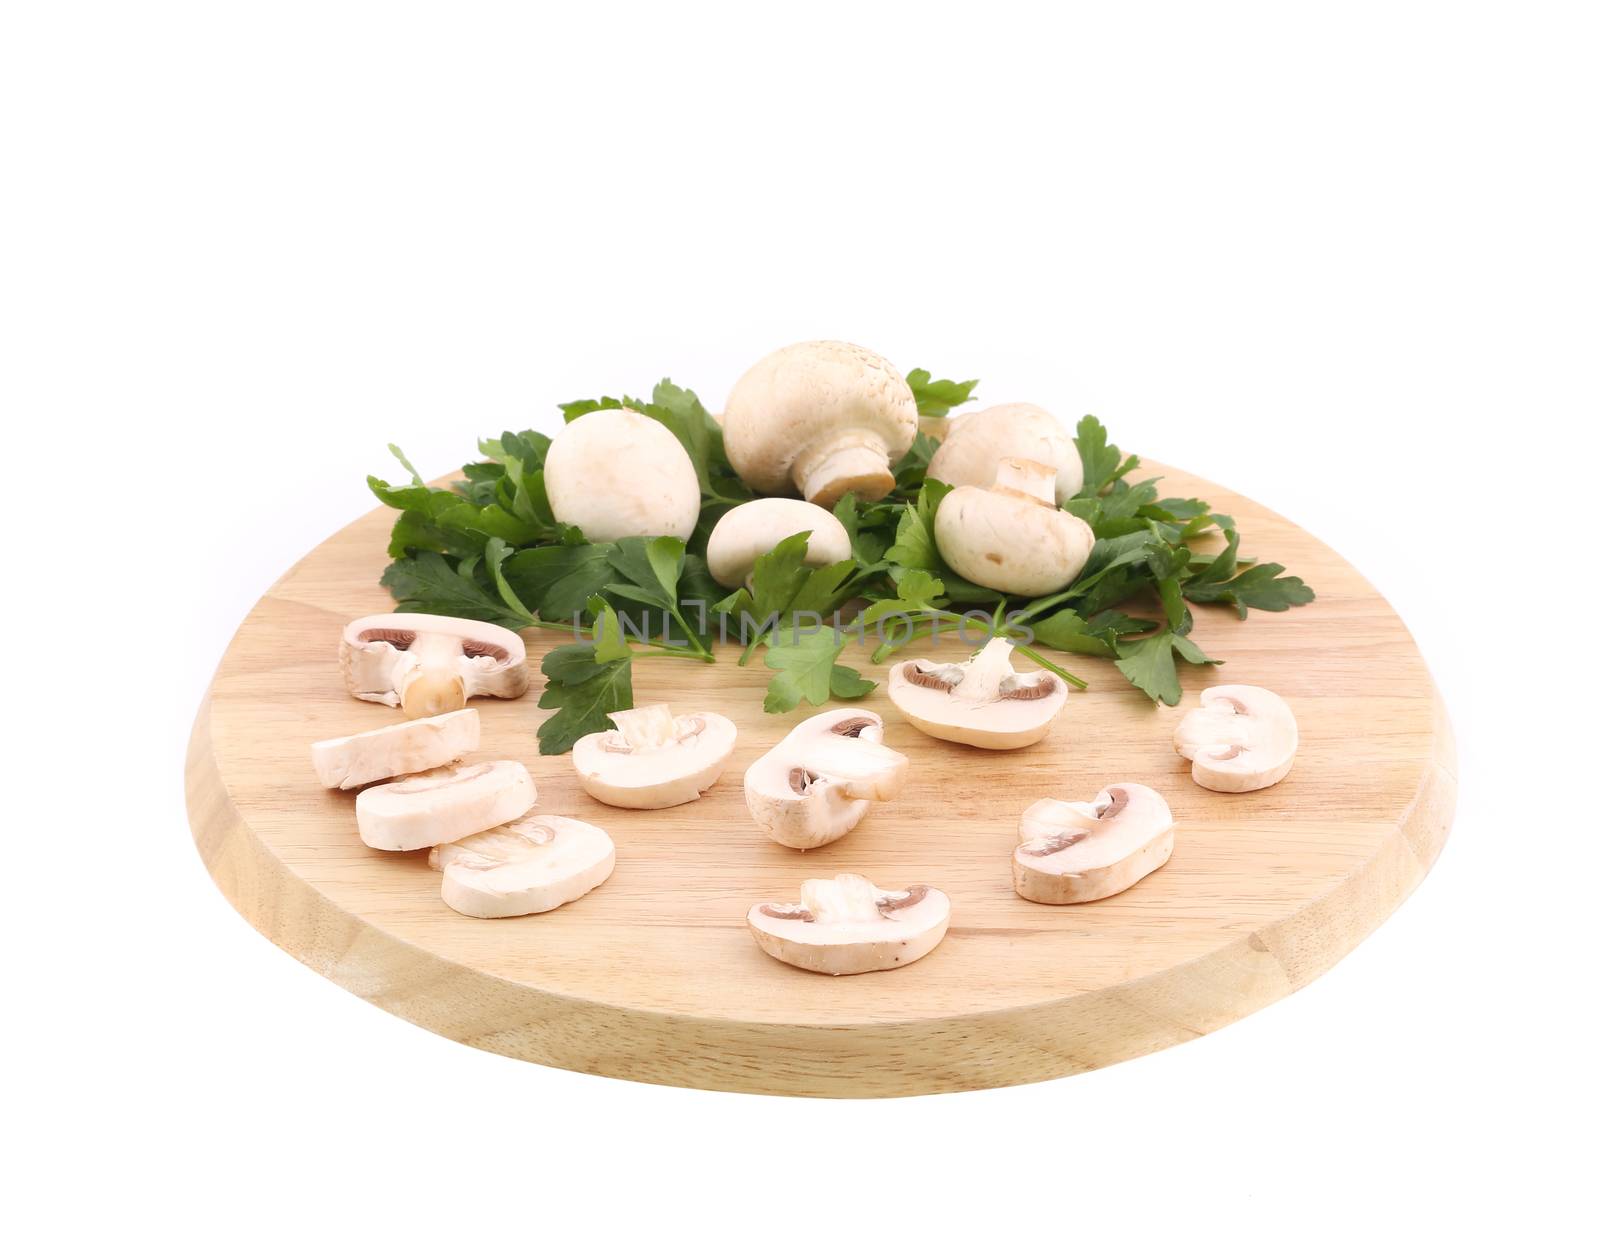 Mushrooms champignon on platter. Isolated on a white background.